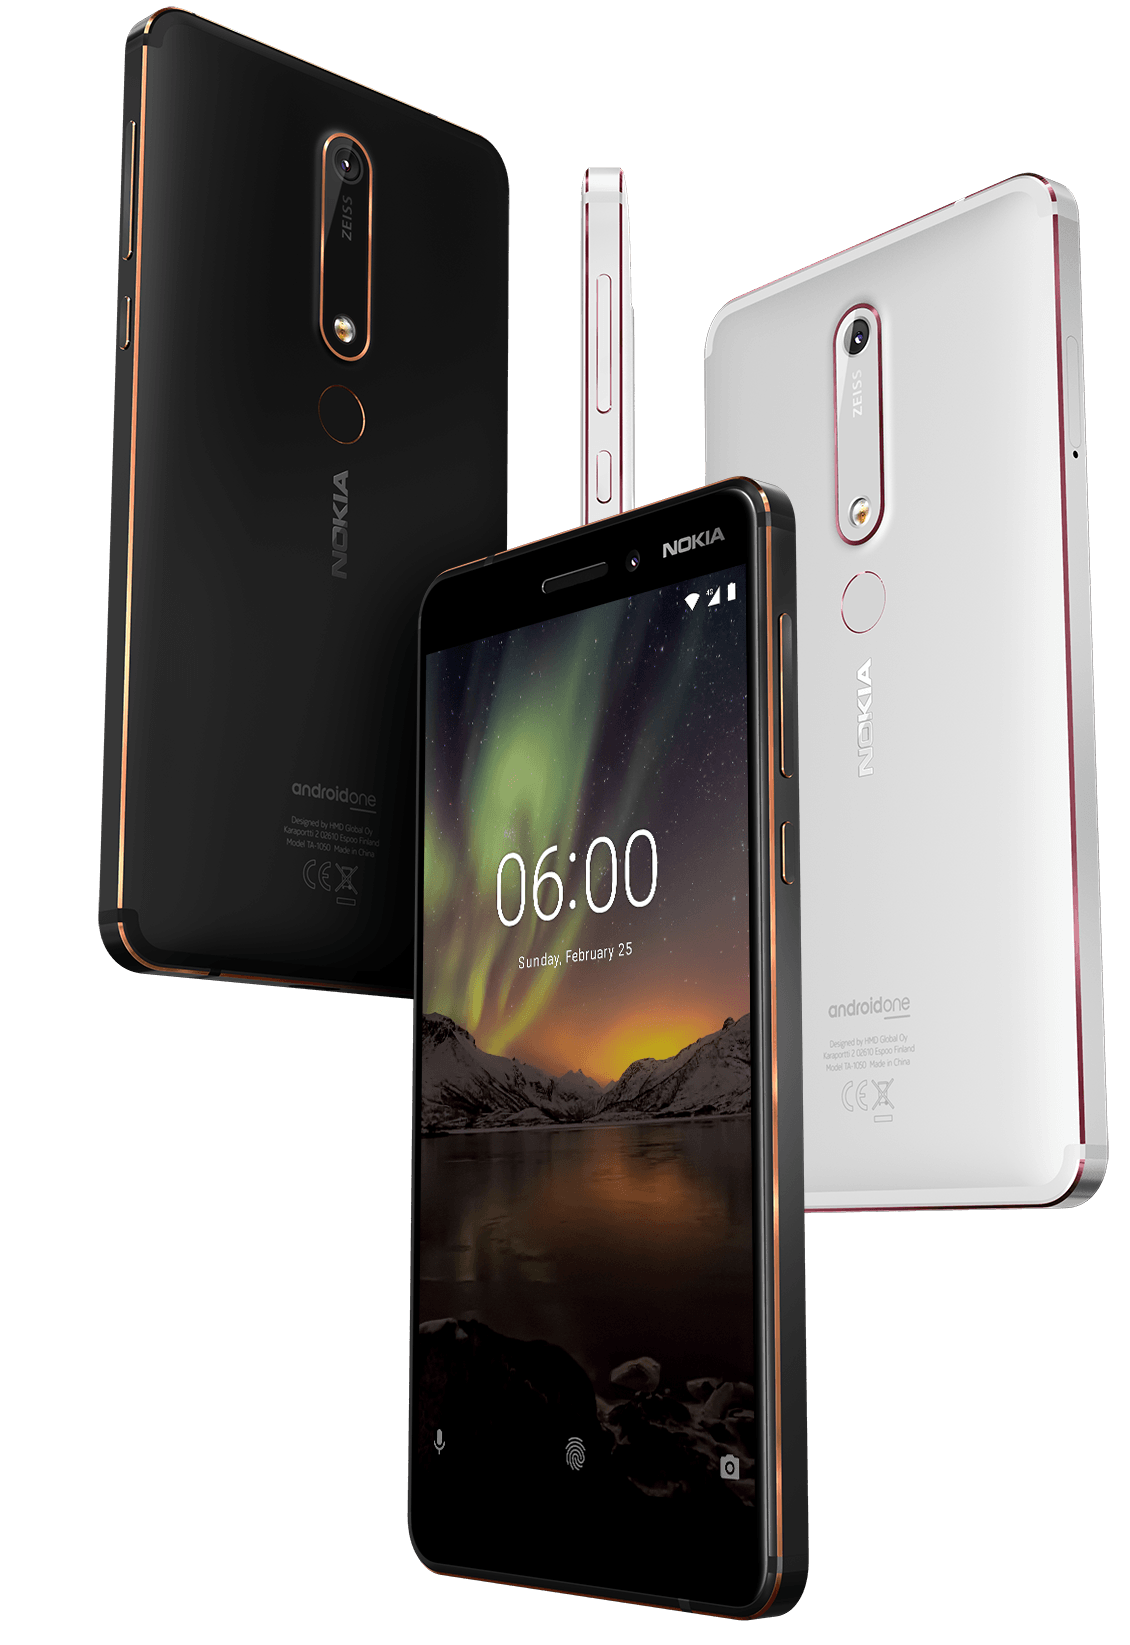 Is The Nokia 6.1 The Right Smartphone For You